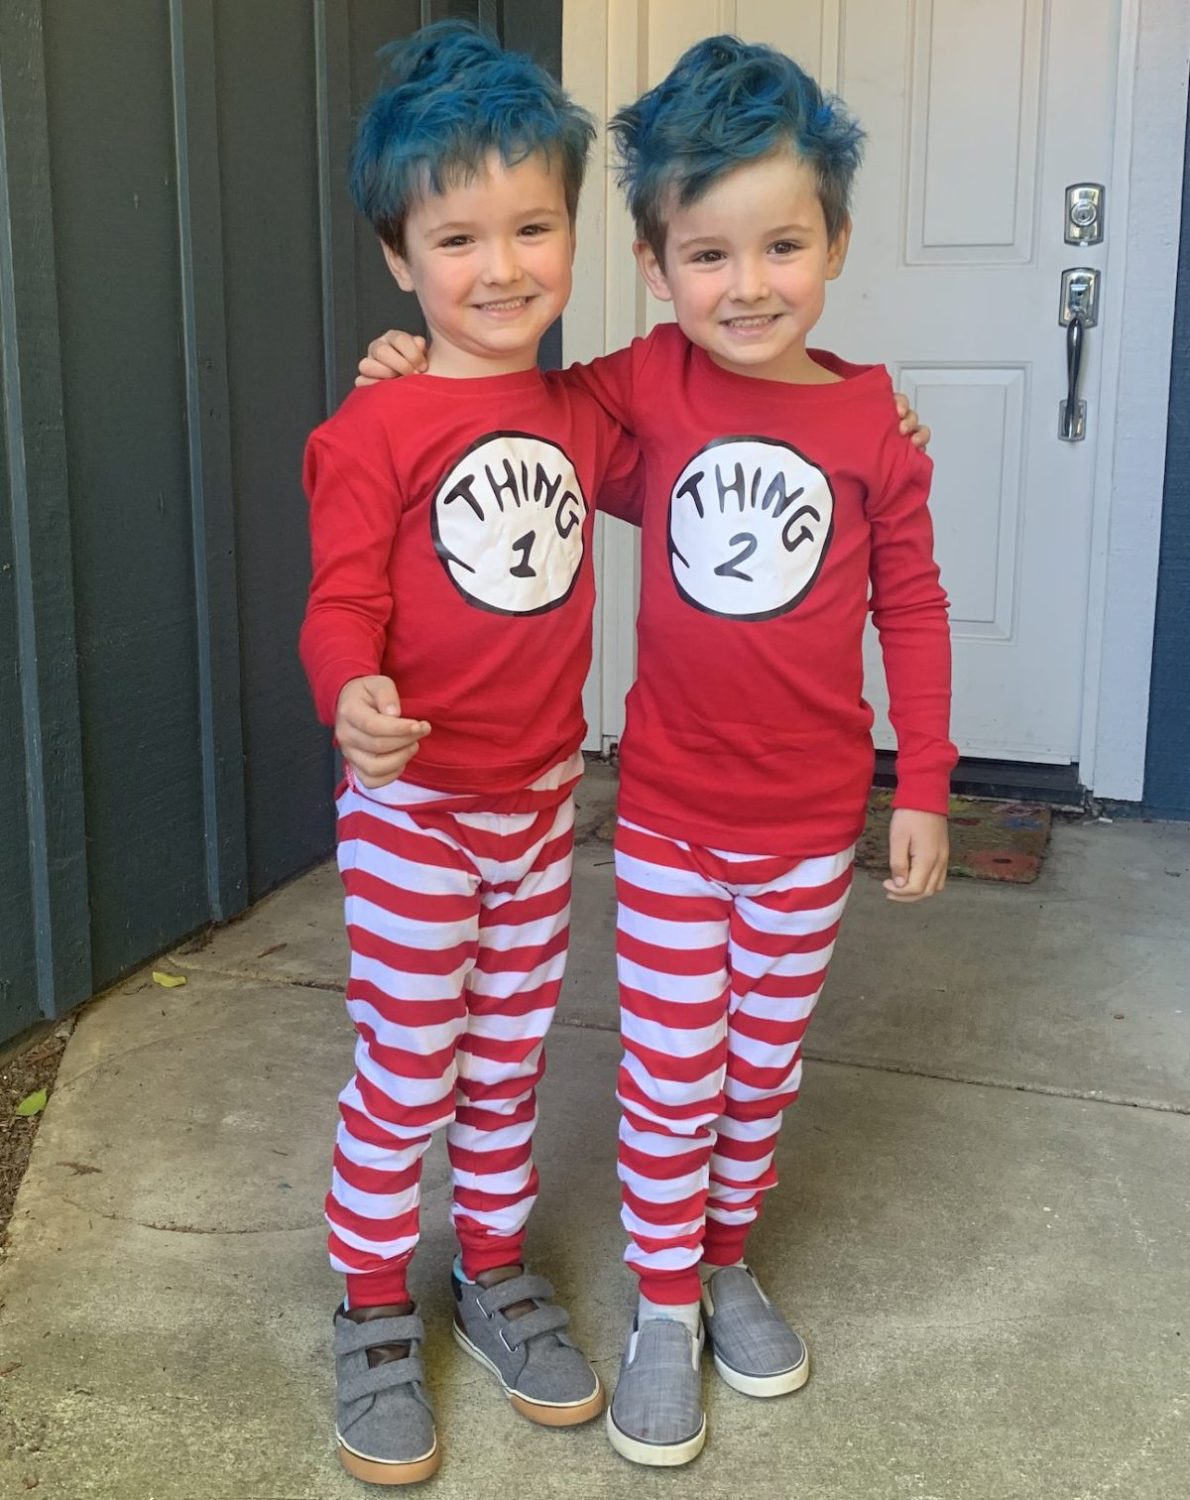 Twin 5-year-olds dressed as thing 1 and thing 2